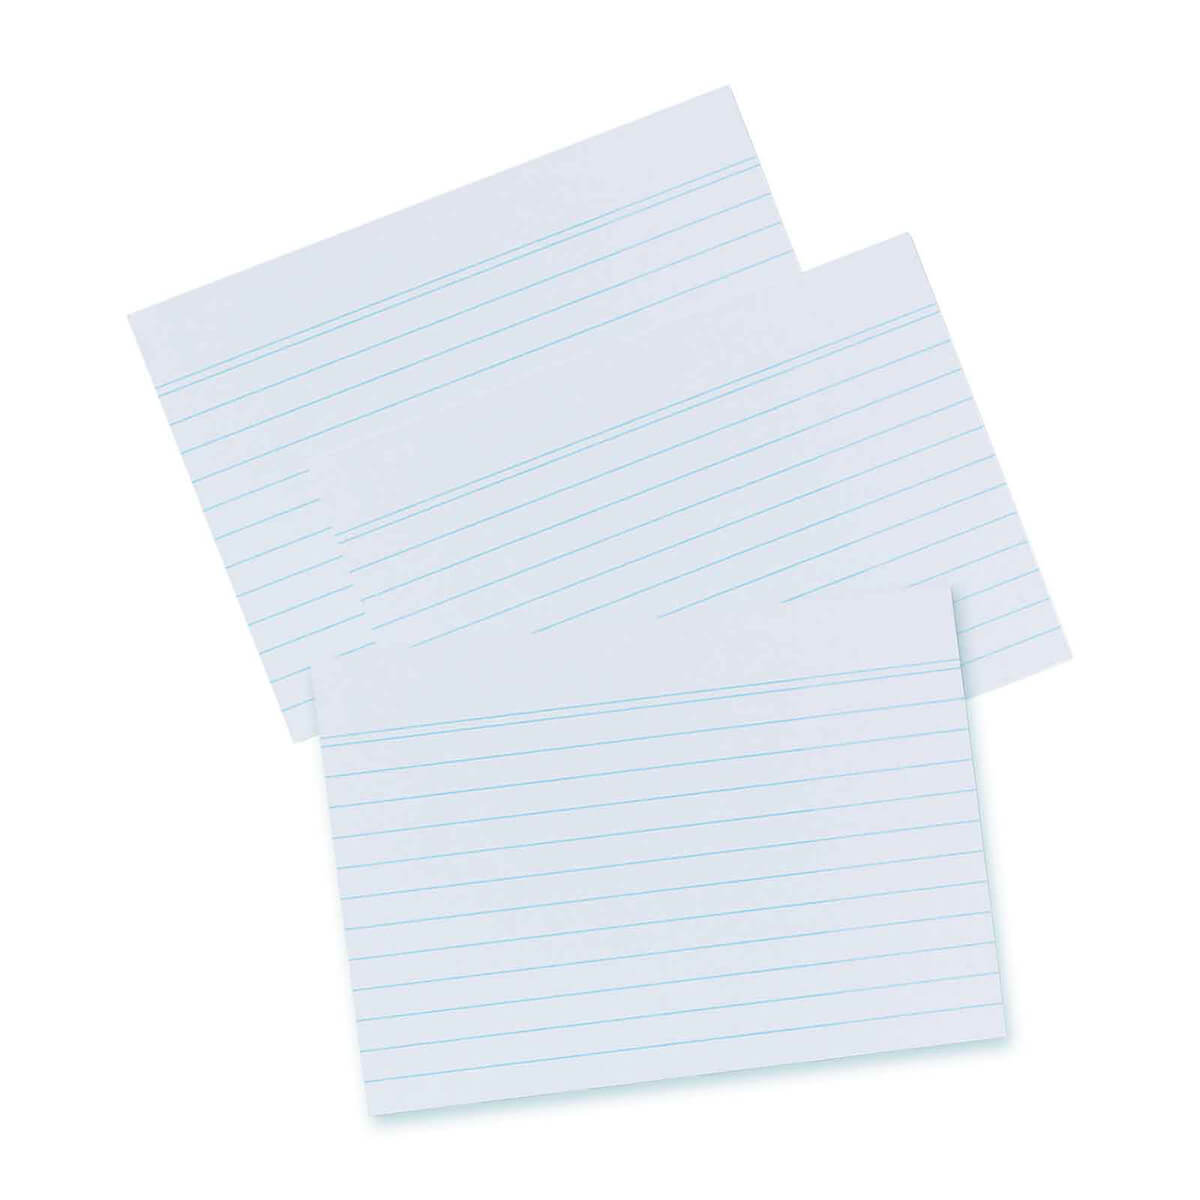 Herlitz Index cards lined 100 pieces shrink-wrapped a5 White